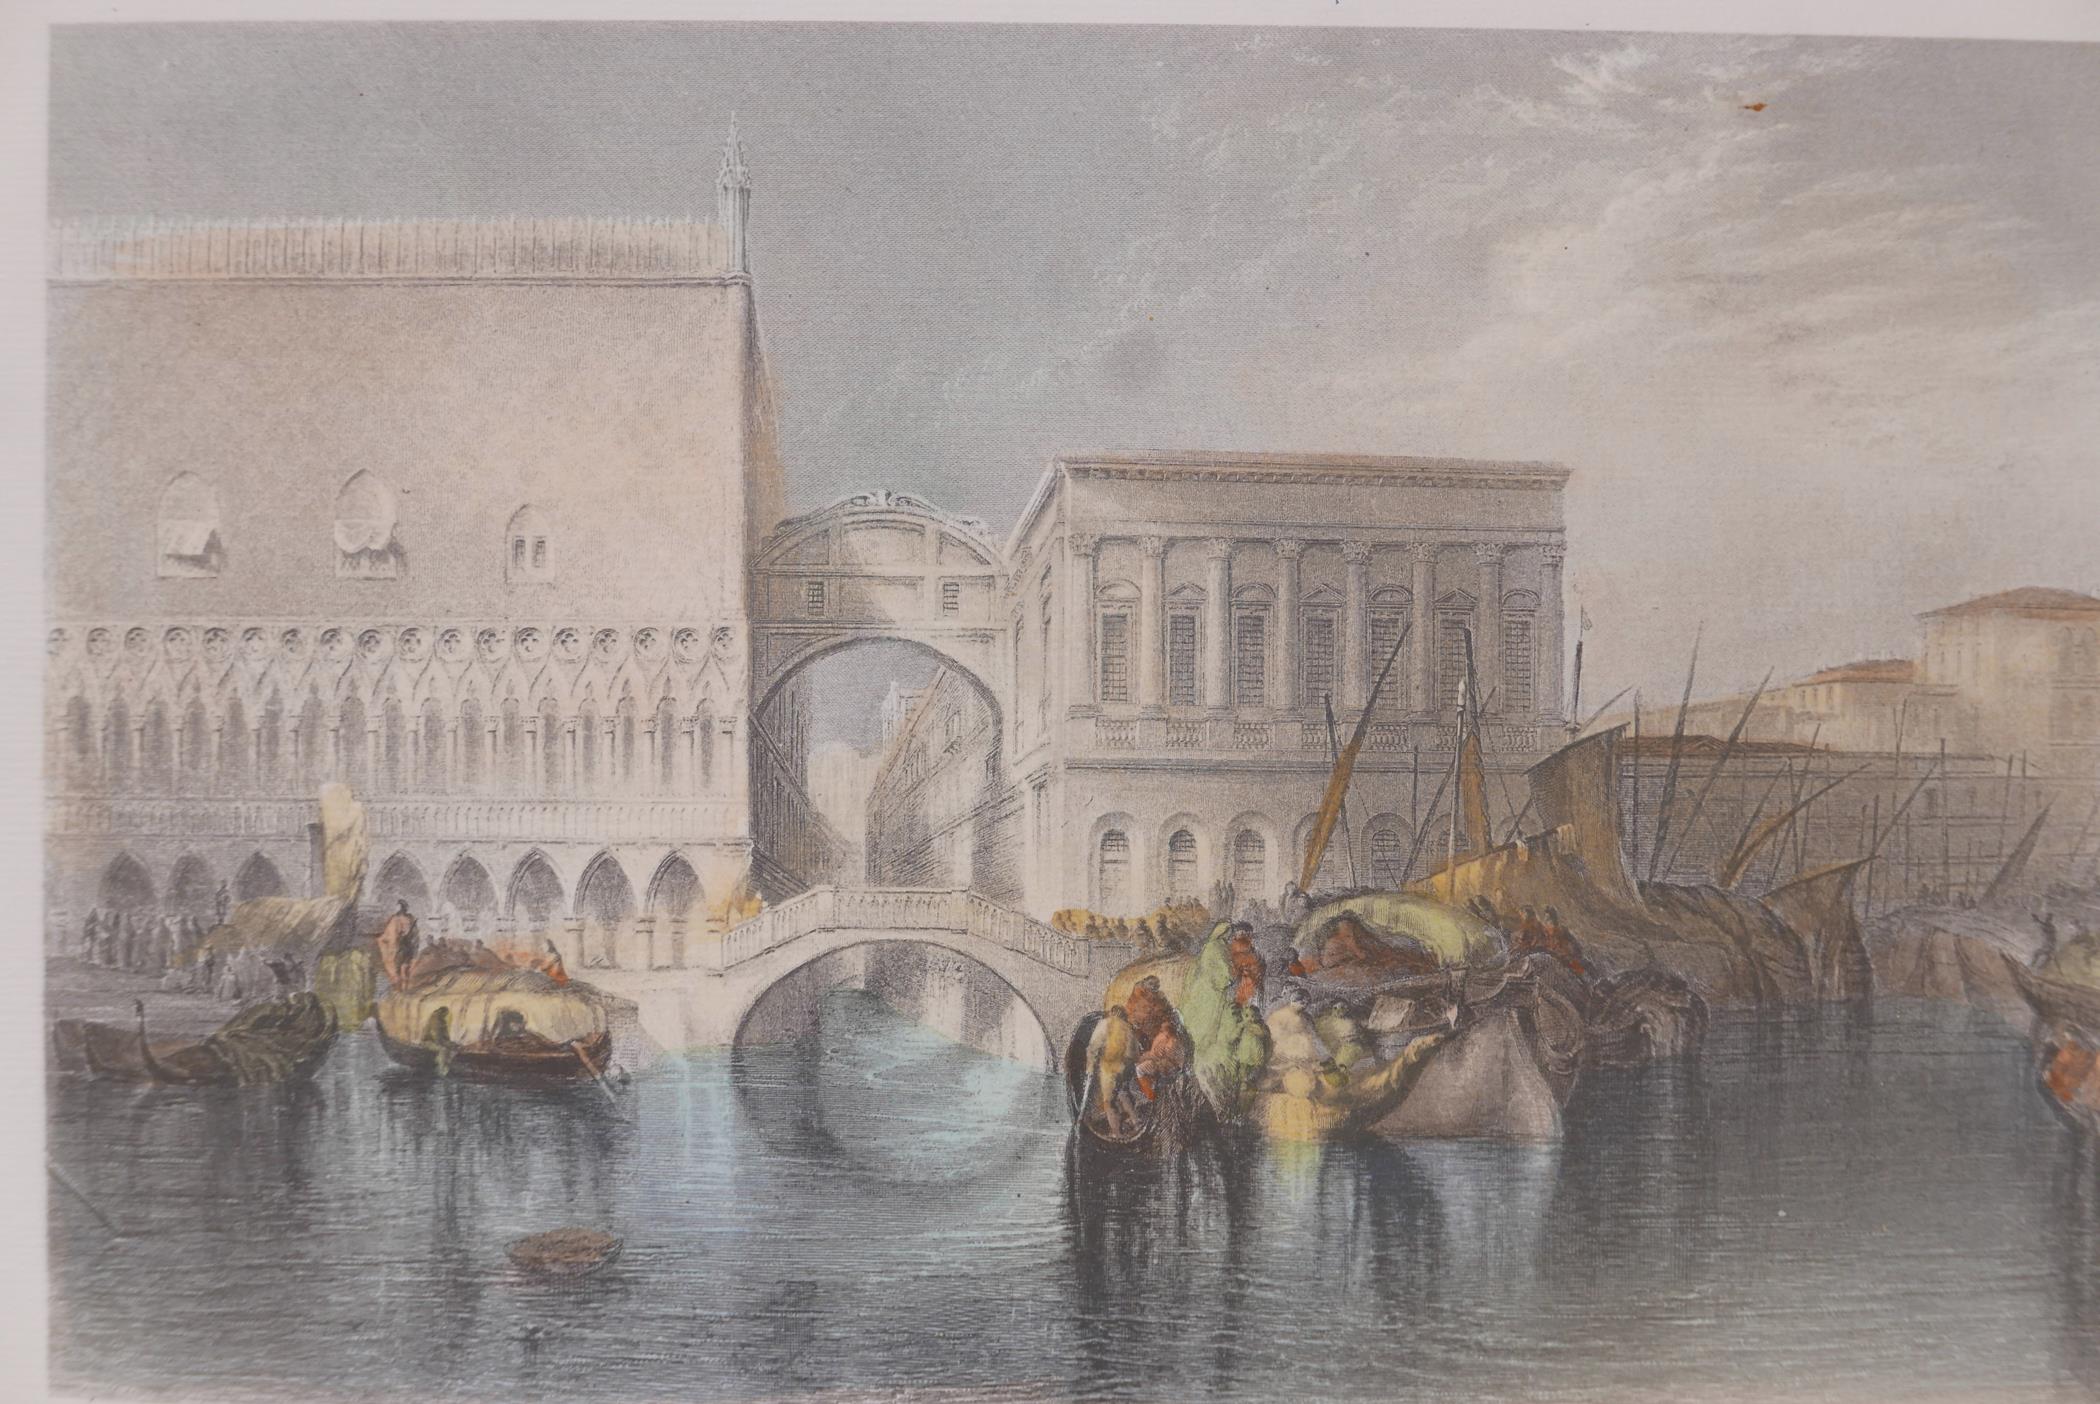 A set of three coloured engravings depicting Venice, after J.W.M. Turner, engraved by J.C. Armytage,